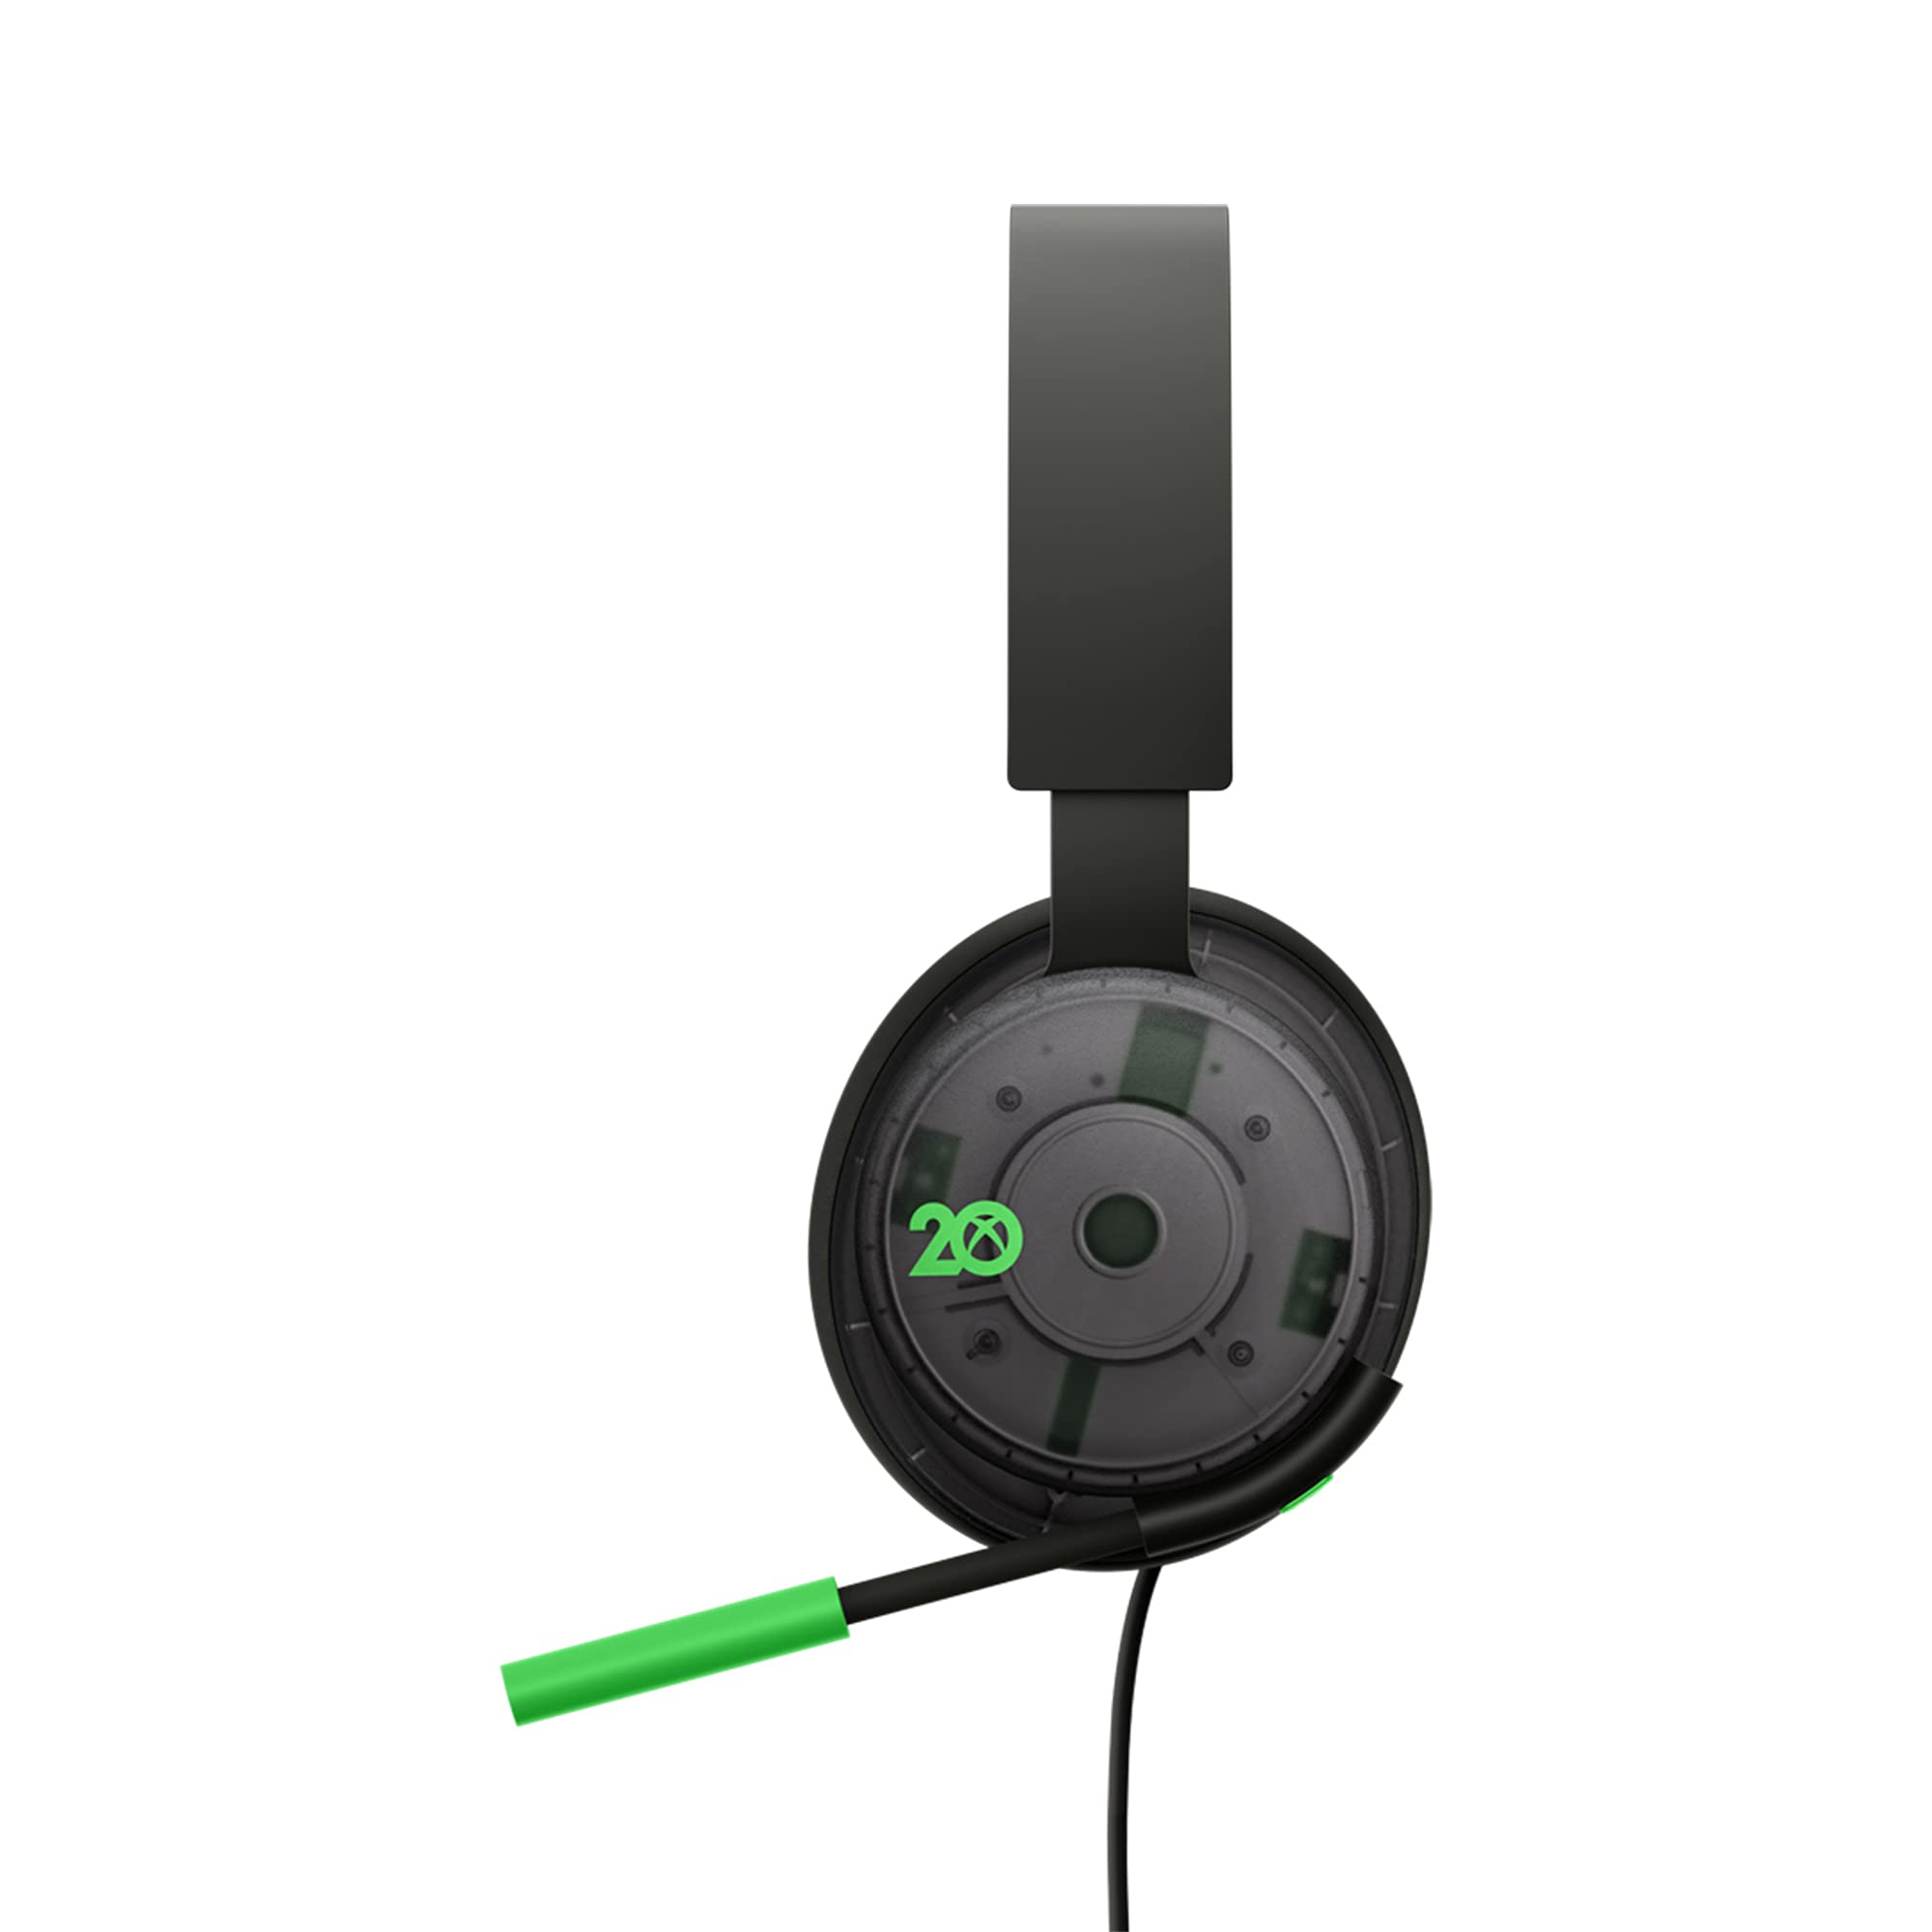 Xbox Stereo Headset: 20th Anniversary Special Edition – Xbox Series X|S, Xbox One, and Windows